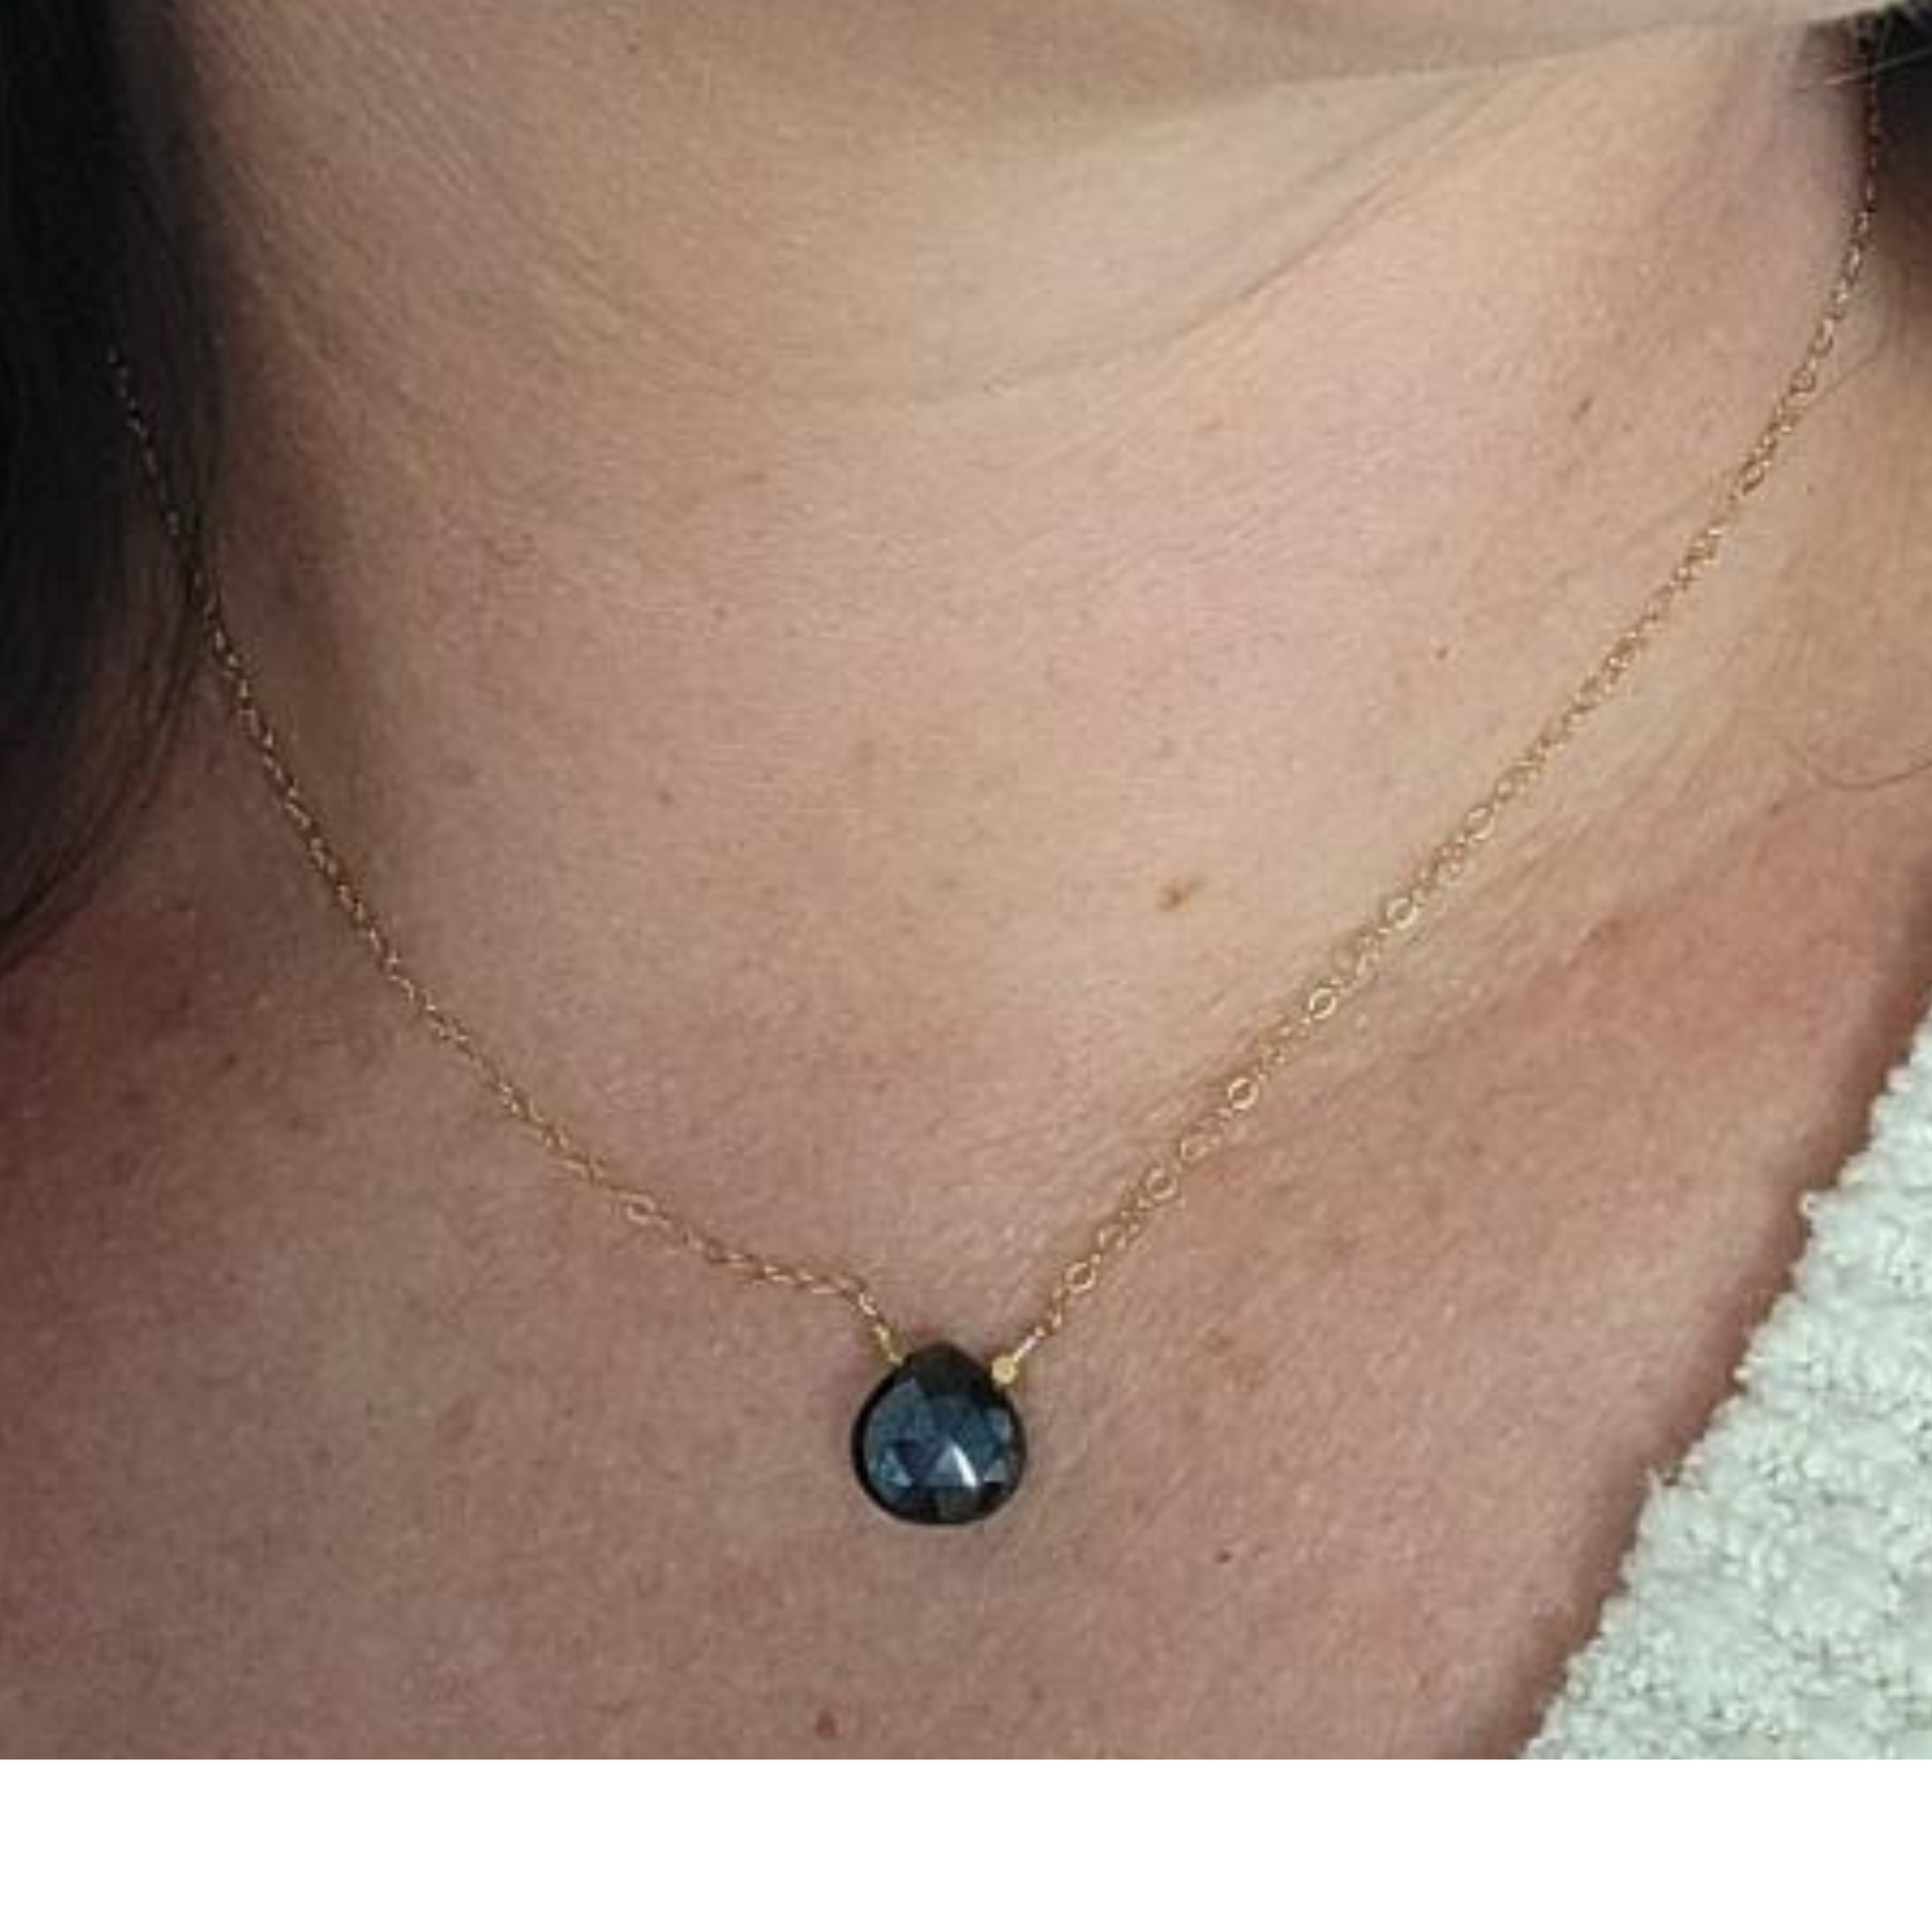 Black spinel necklace as worn by Angelina Jolie at the